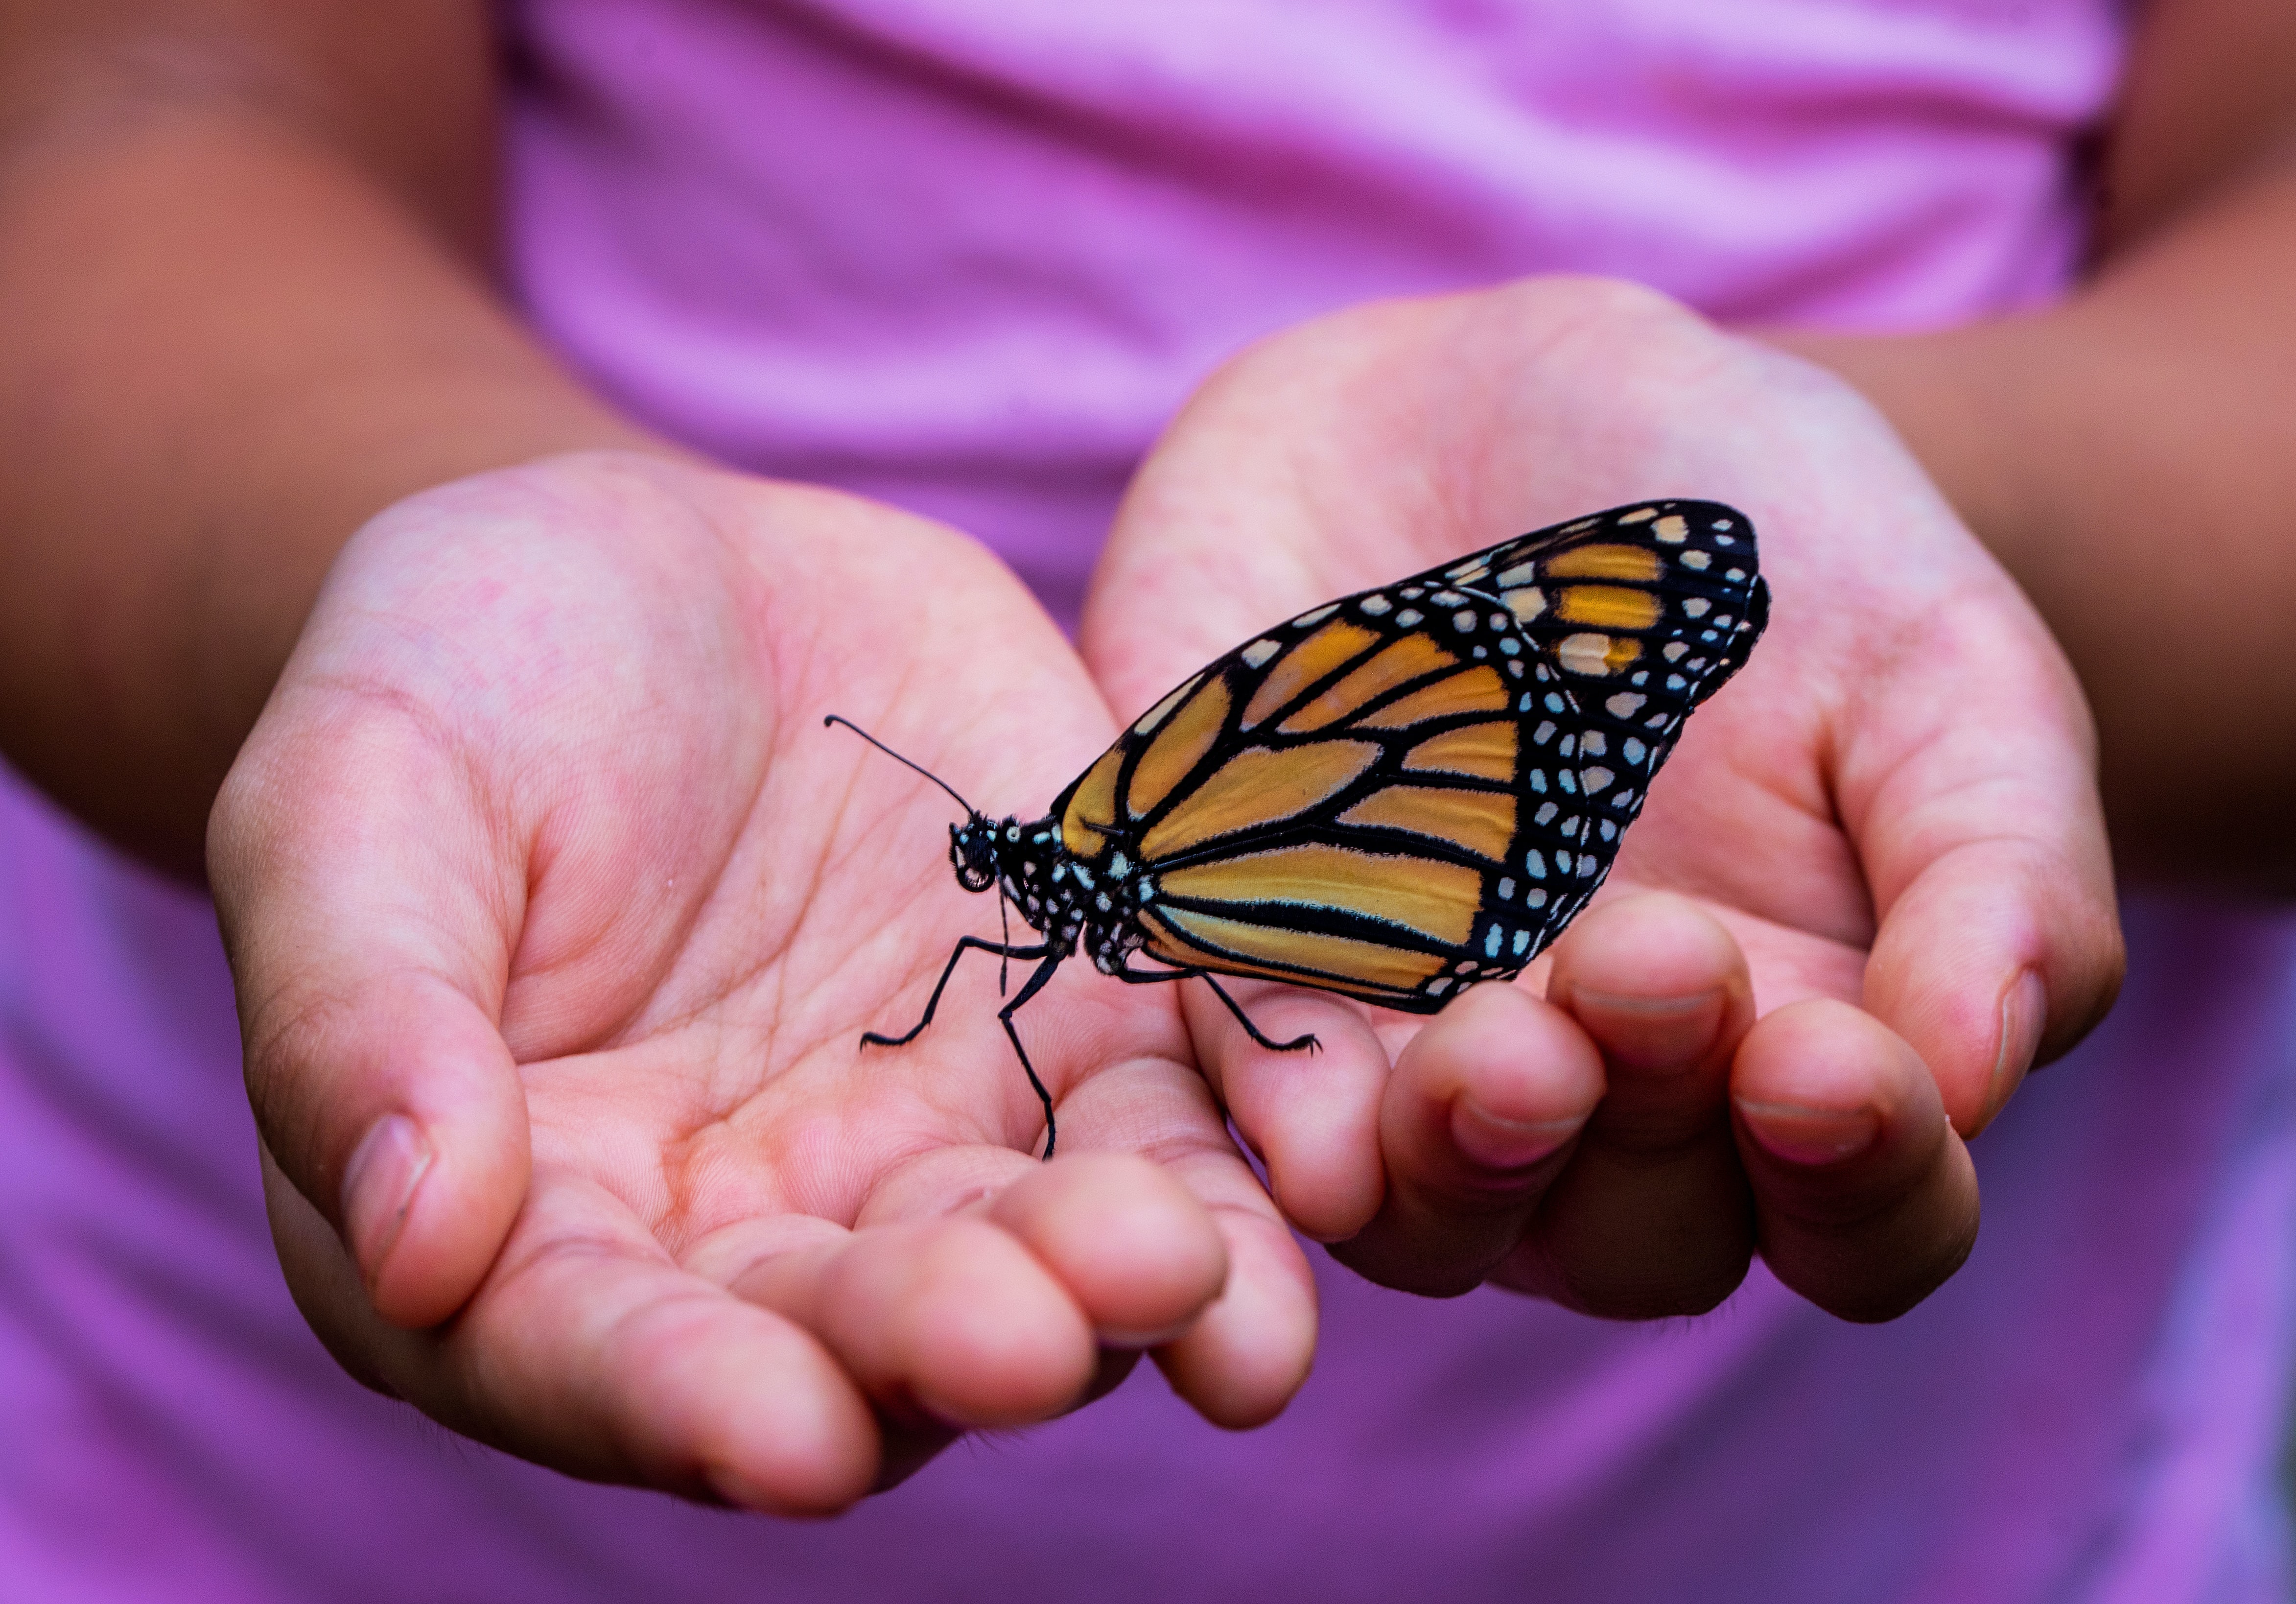 Image of butterfly held between two hands